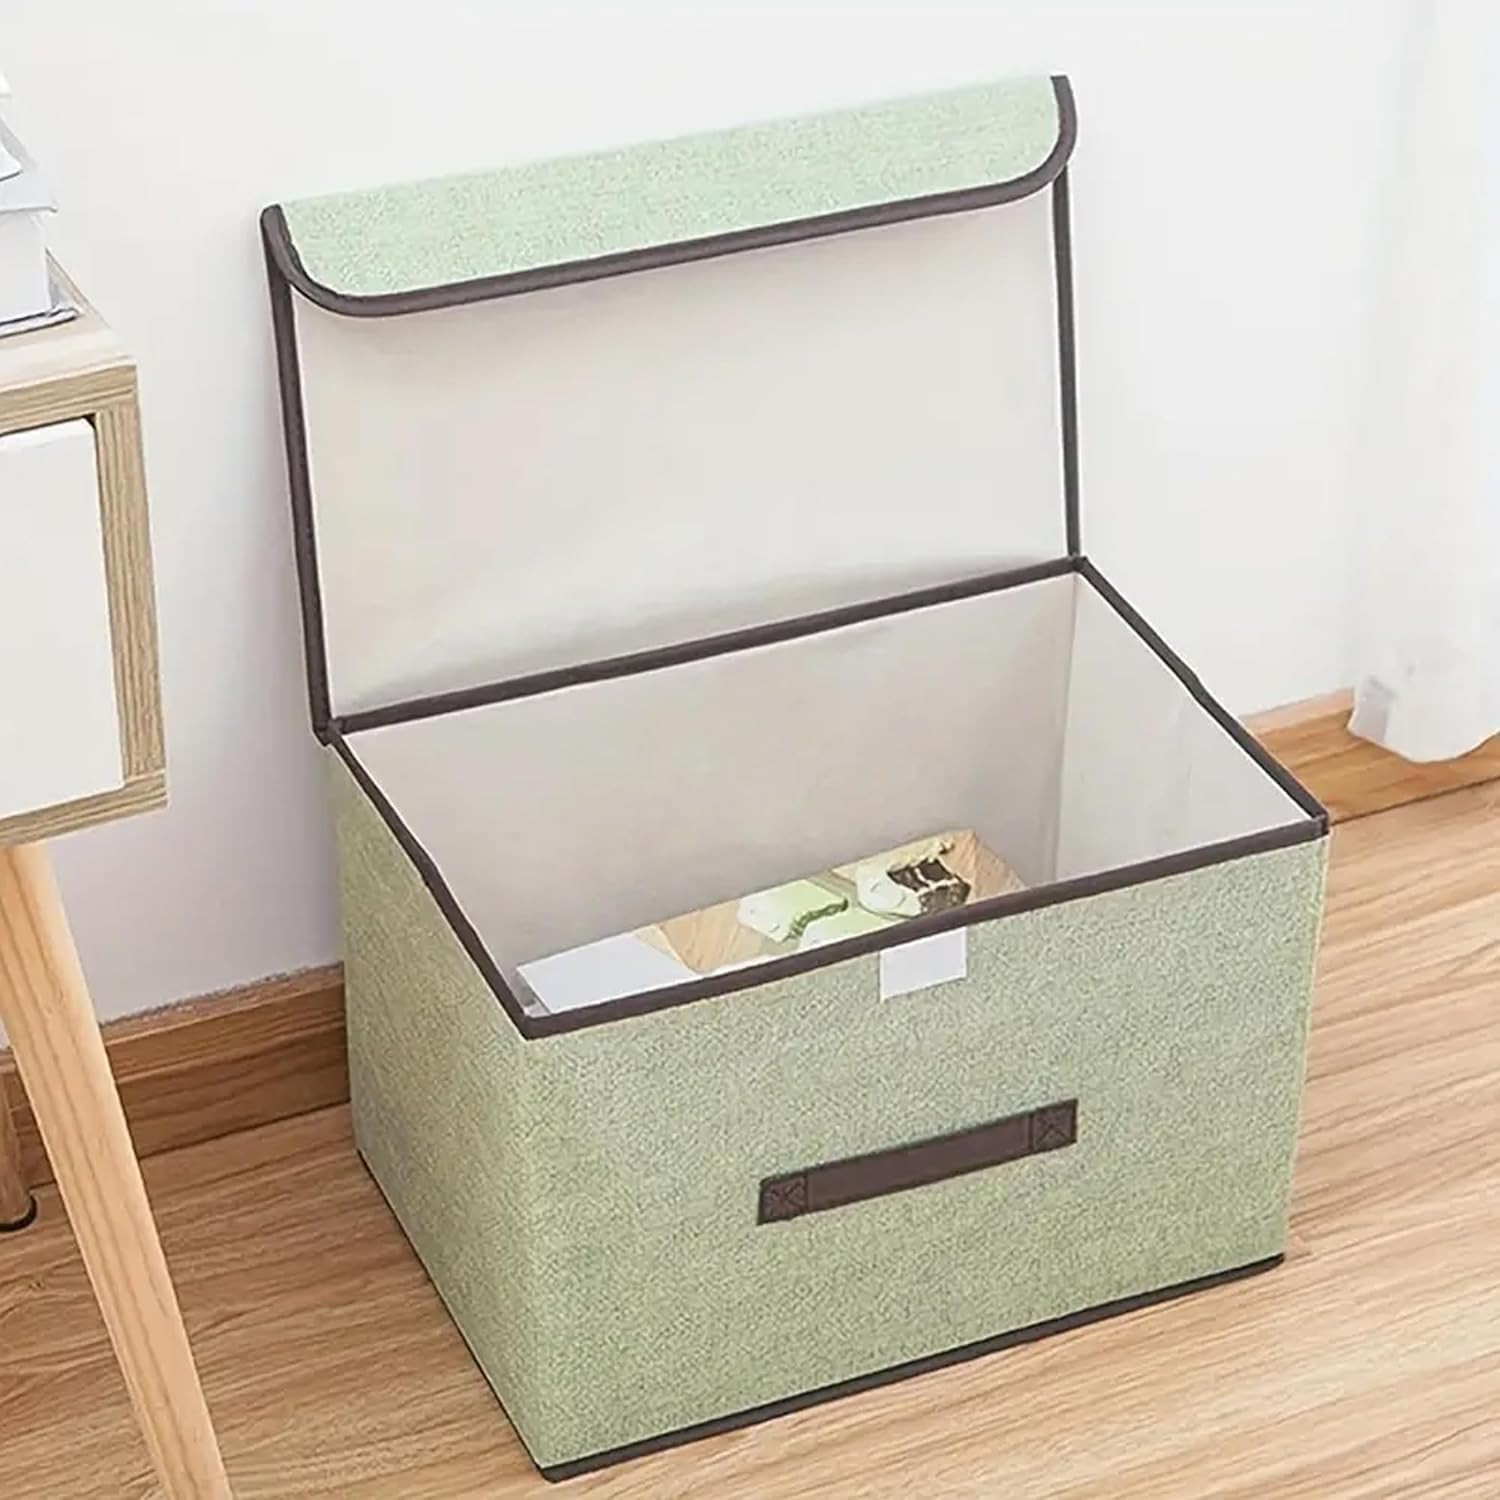 Kuber Industries Small Storage Box With Lid|Foldable Toys Storage Bin|Wardrobe Organizer For clothes|Front Handle & Sturdy (Green)